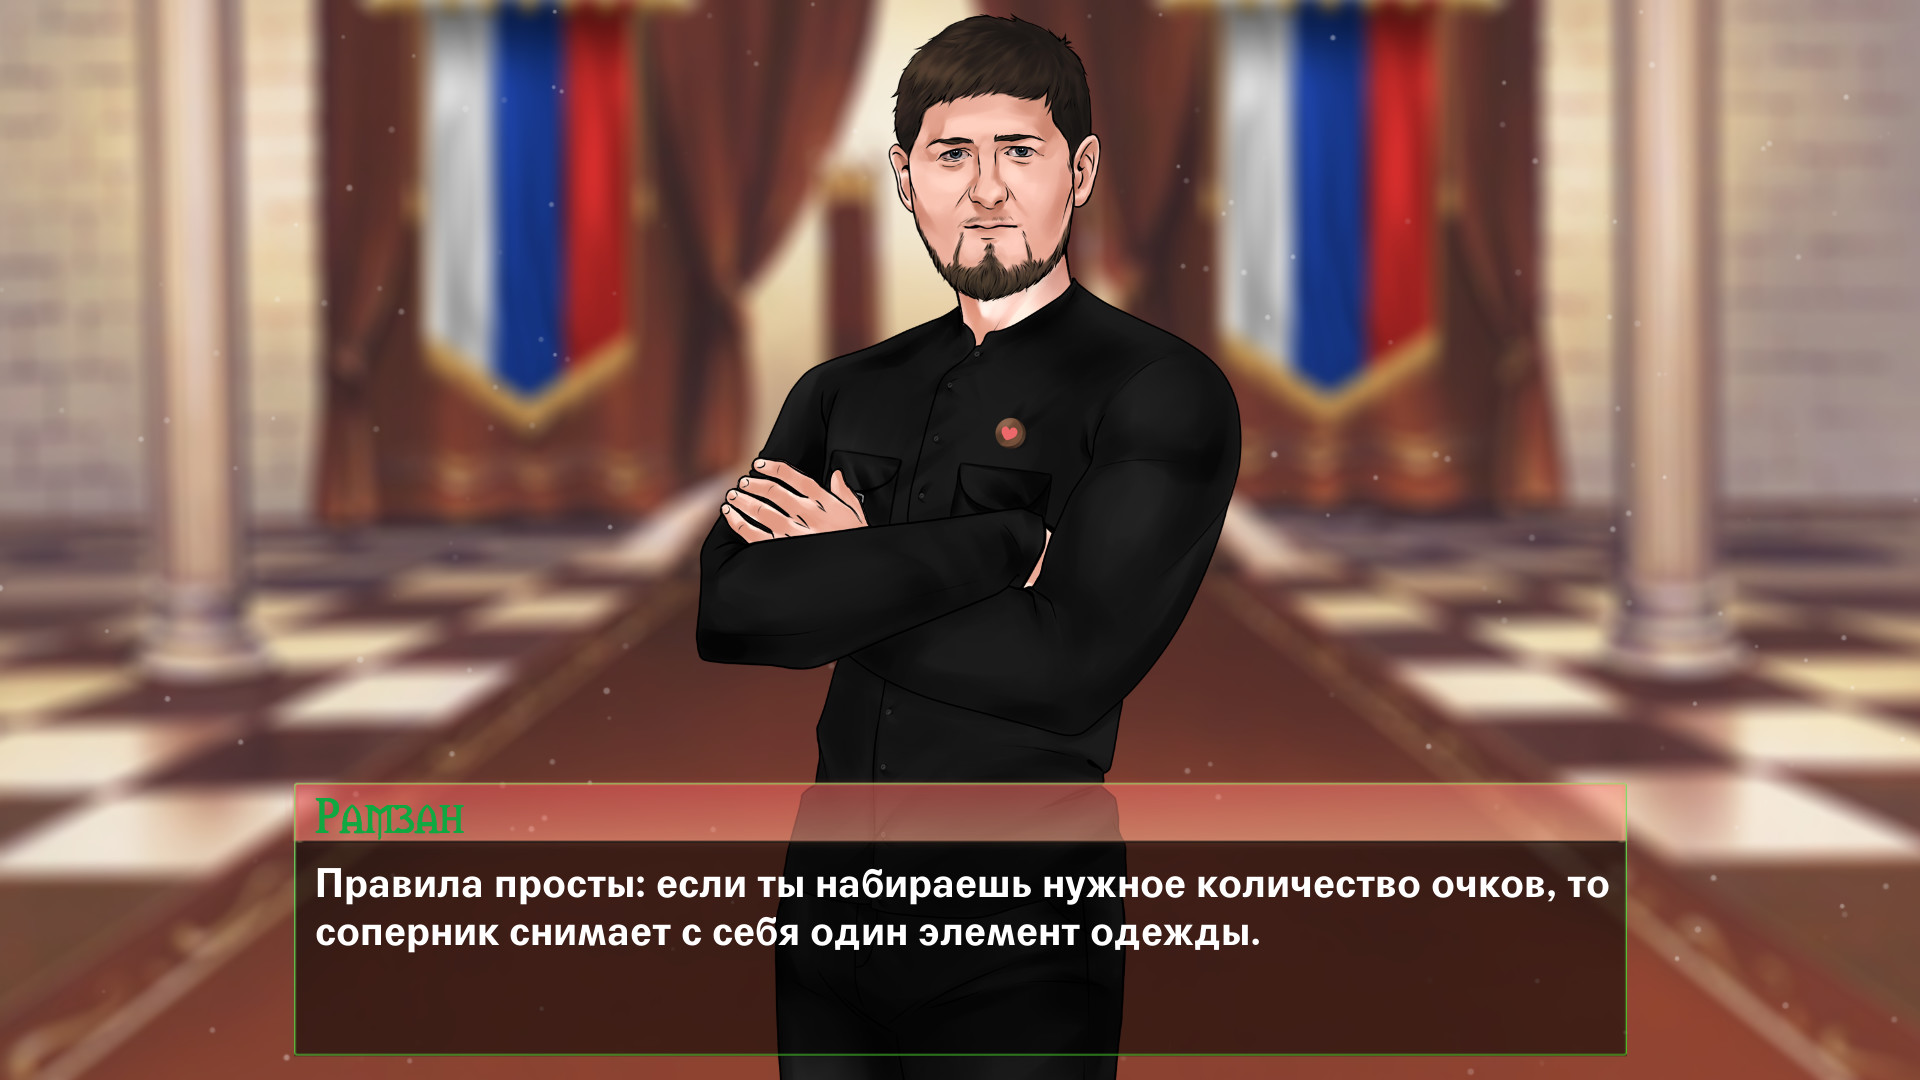 Find the best computers for Love with Kadyrov